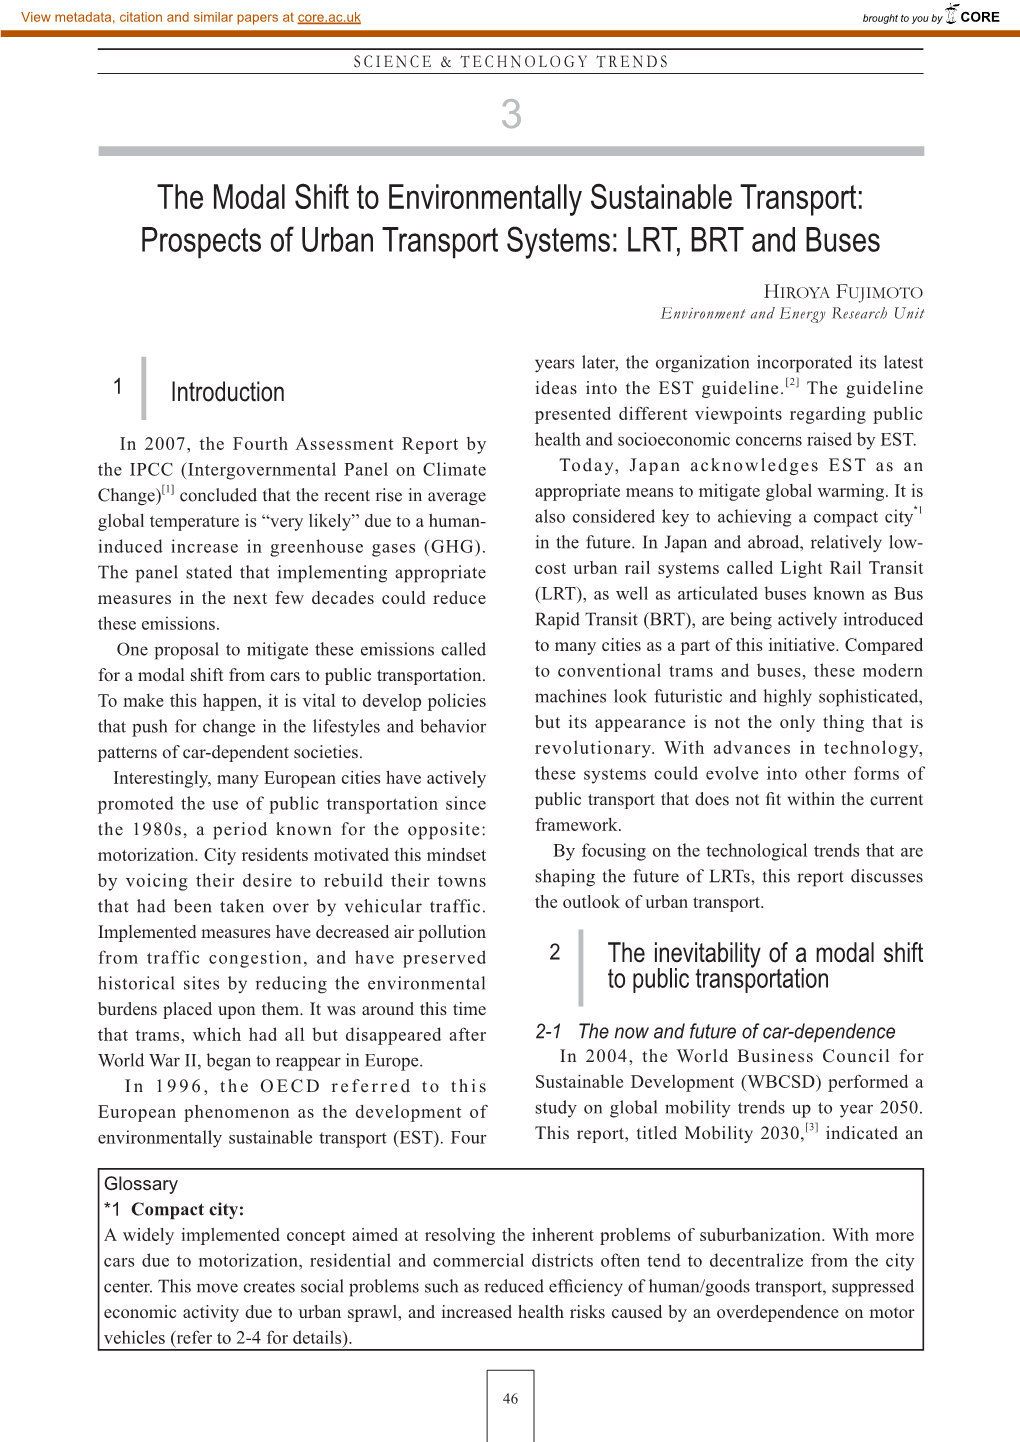 The Modal Shift to Environmentally Sustainable Transport: Prospects of Urban Transport Systems: LRT, BRT and Buses